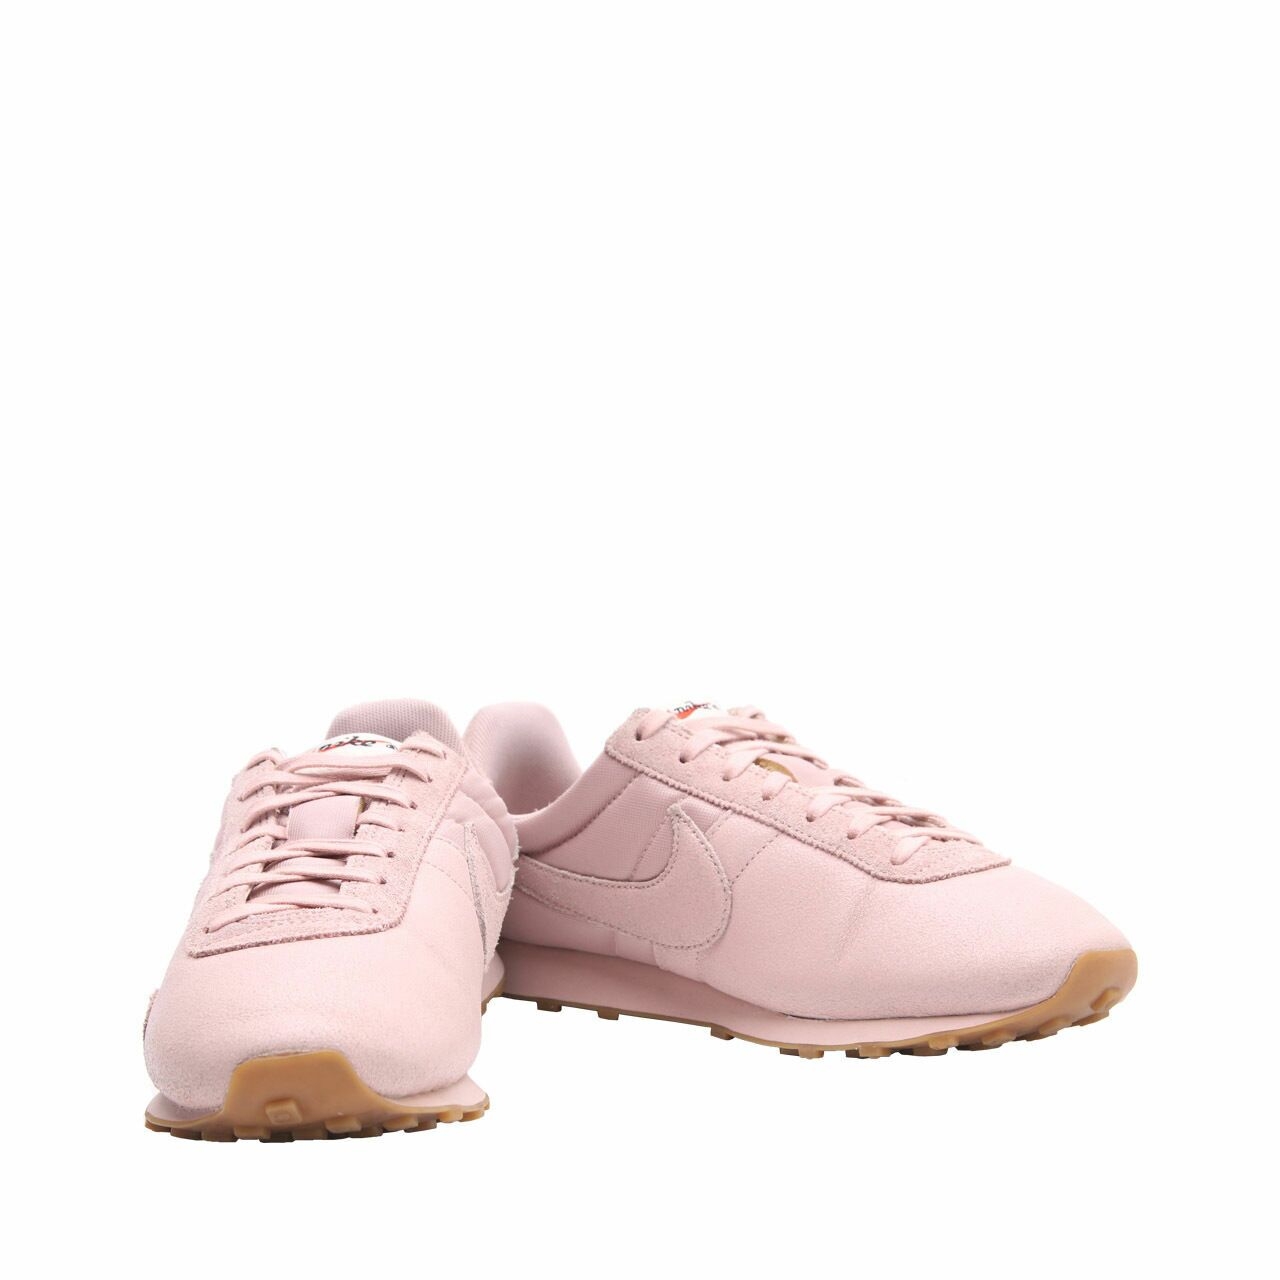 Nike Wmns Pre Montreal Racer Vntg Prm Pink Oxford Sneakers